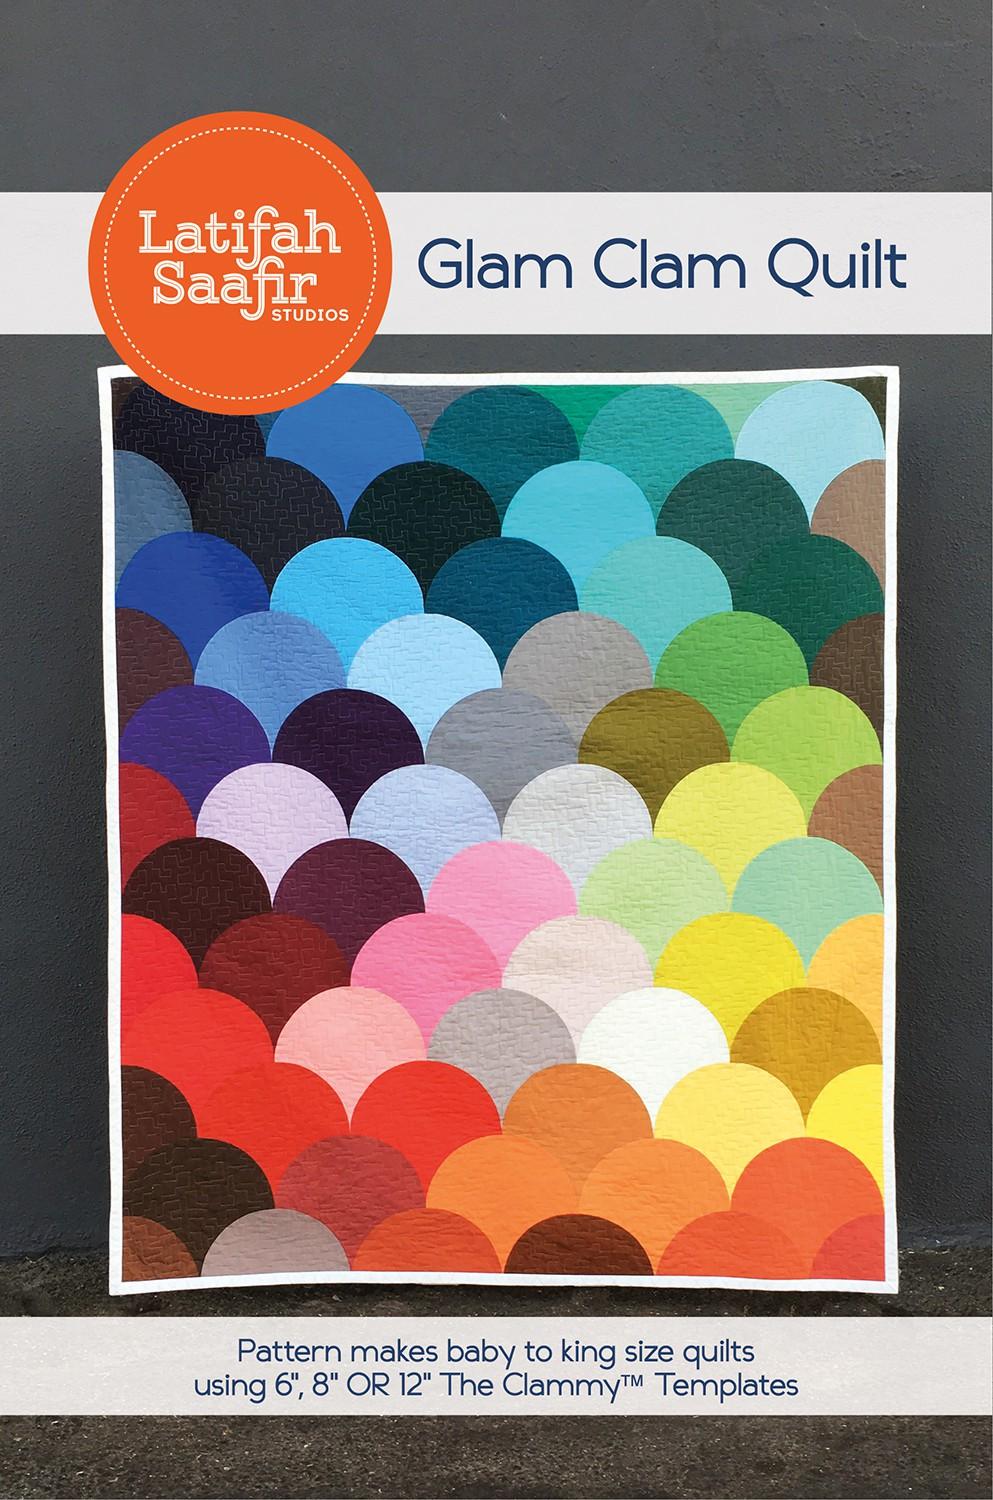 Glam Clam Quilt  Pattern